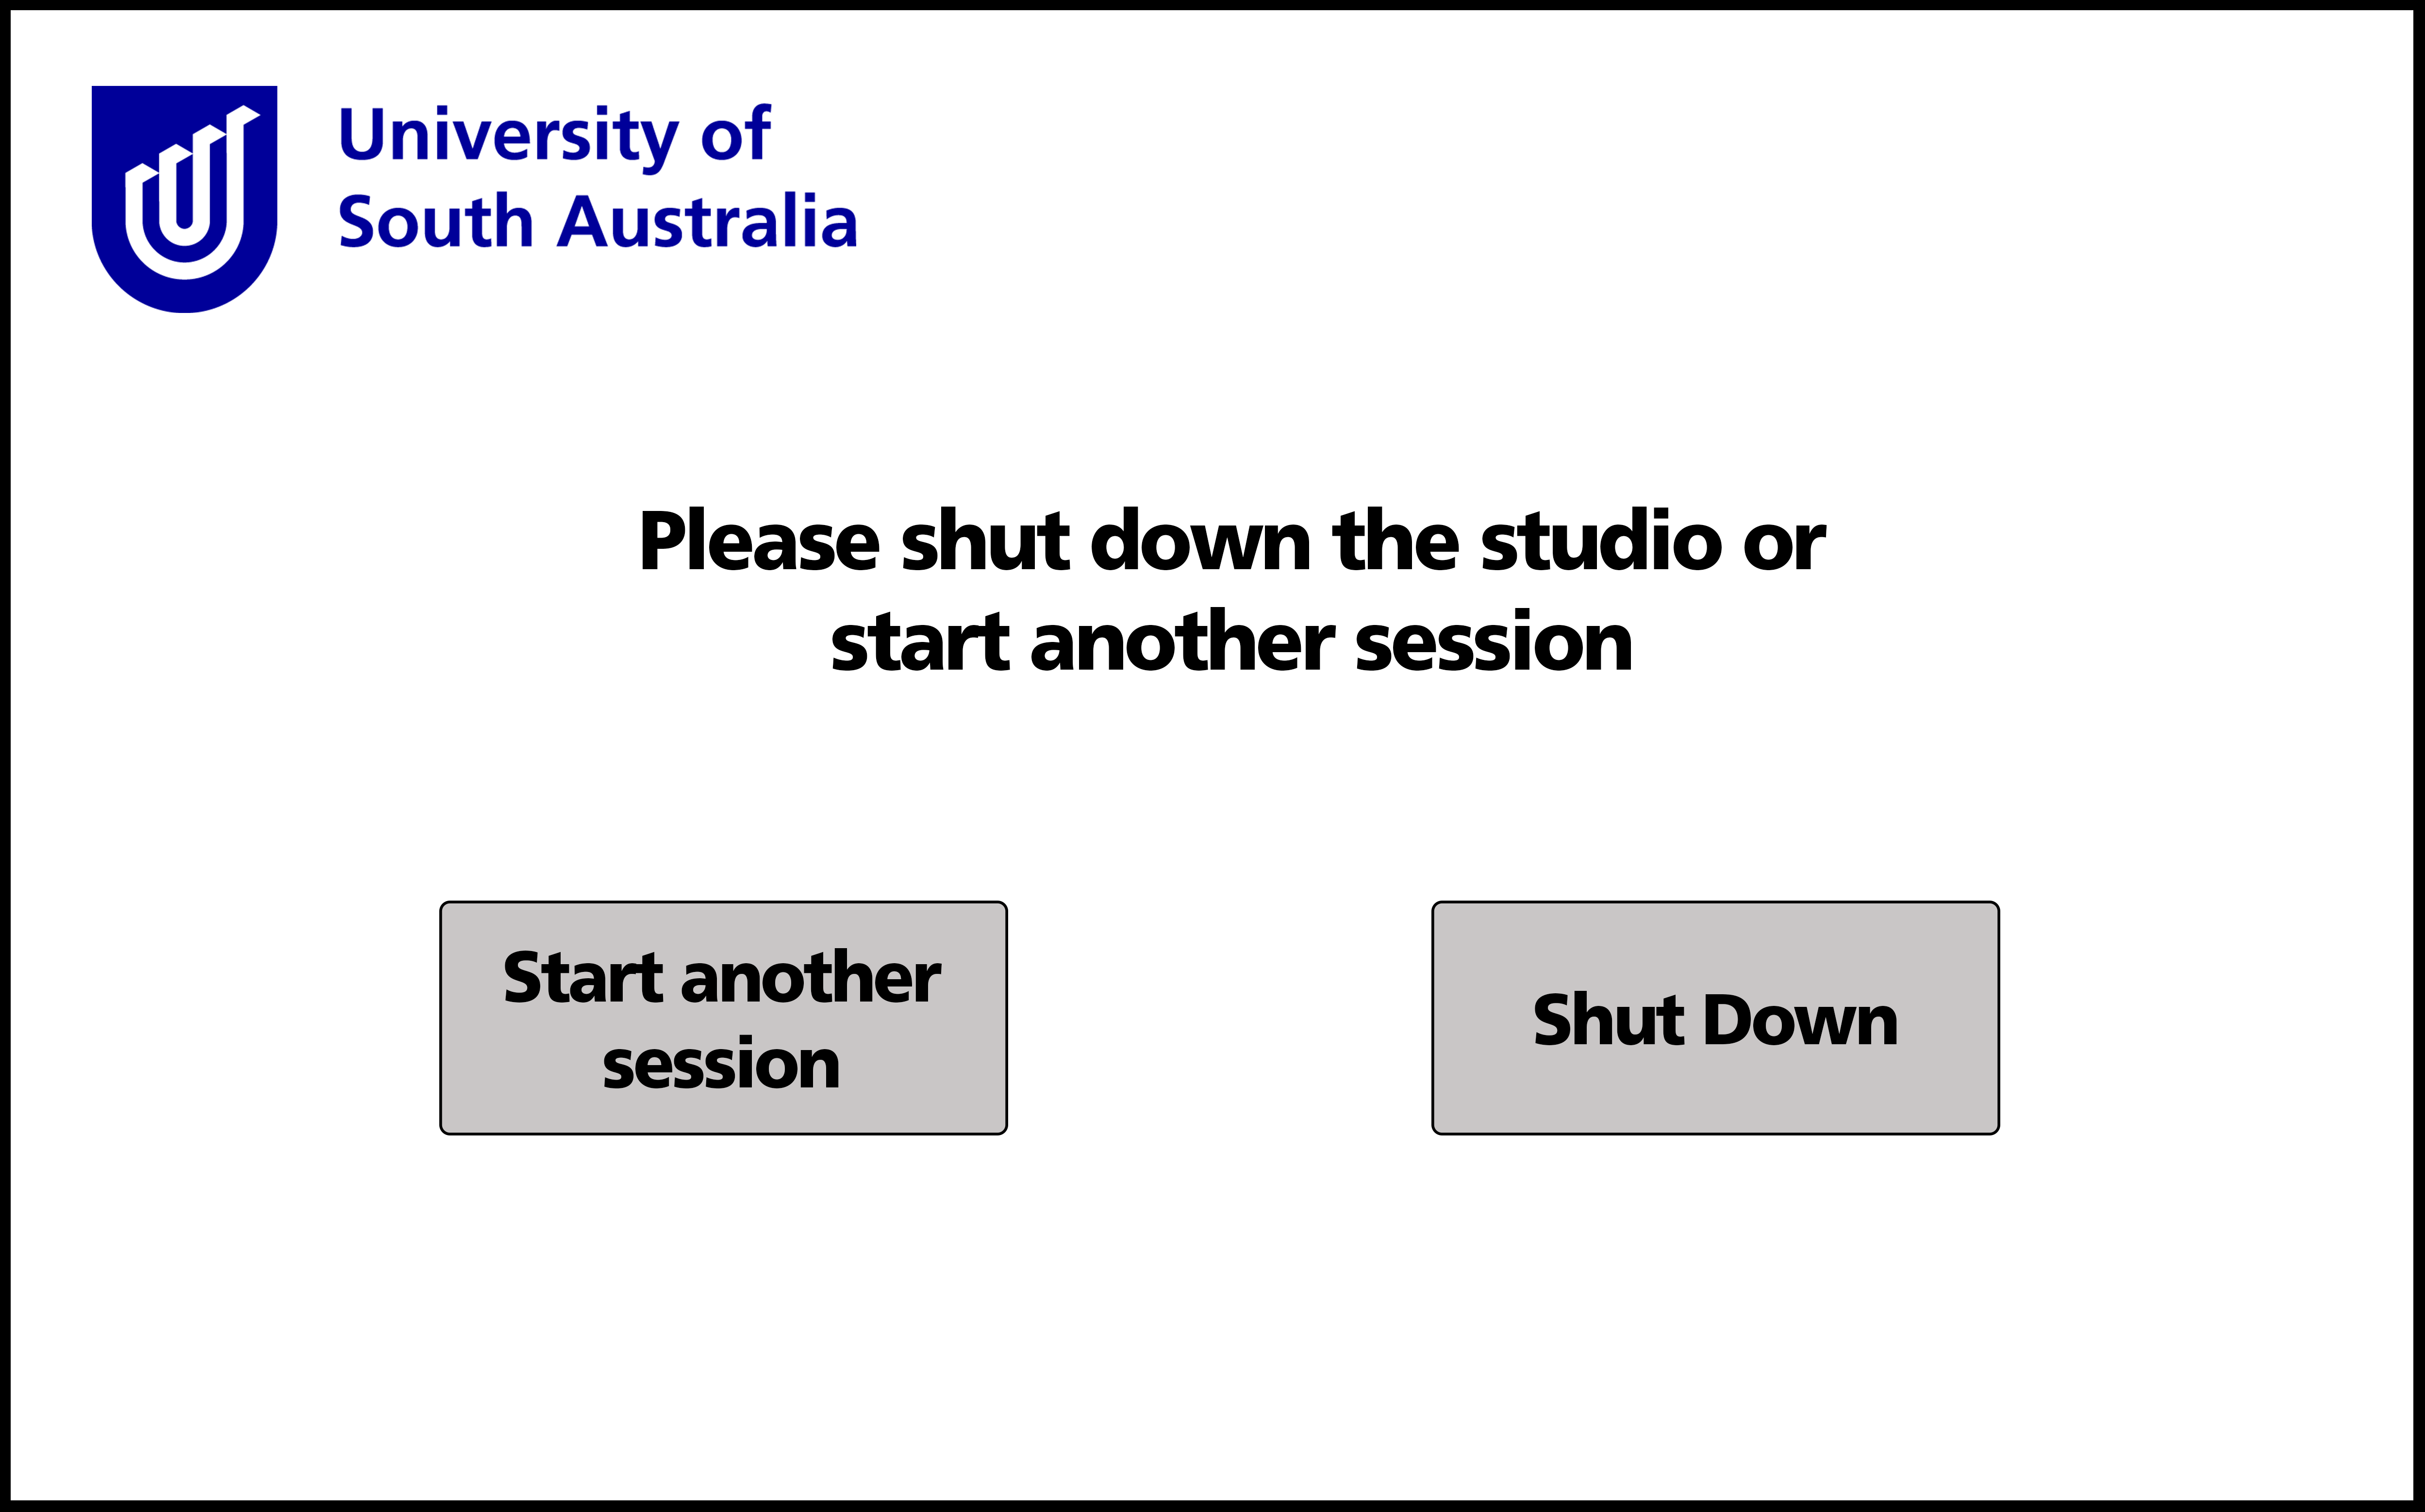 AV Touch Panel from Green Screen Room - end screen - "please shut down the studio or start another session"